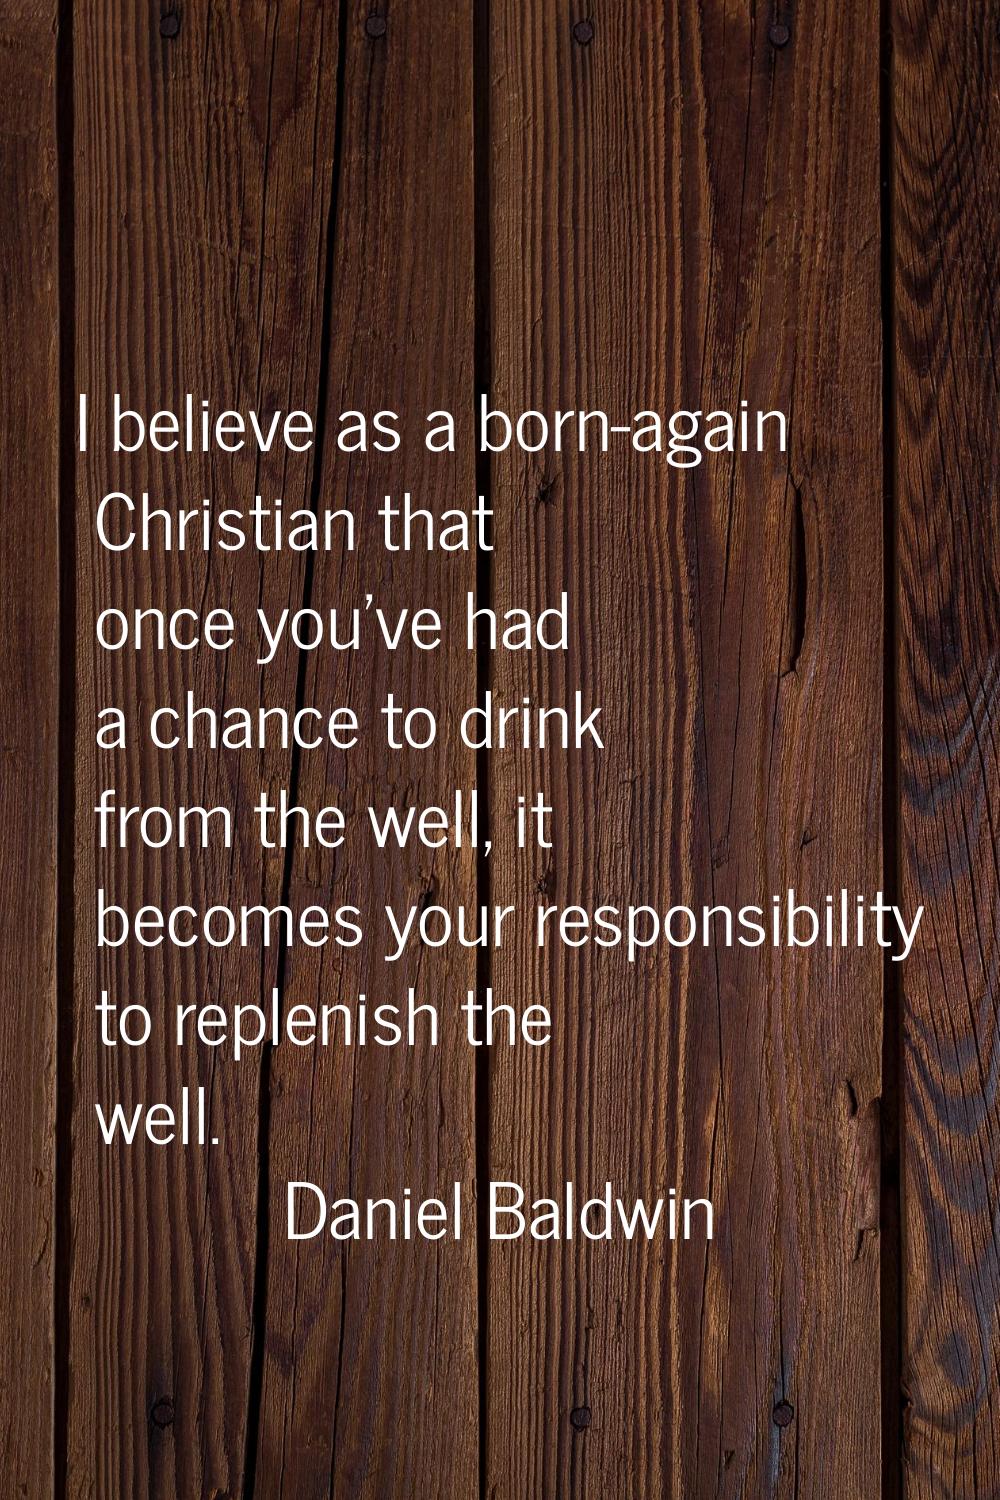 I believe as a born-again Christian that once you've had a chance to drink from the well, it become